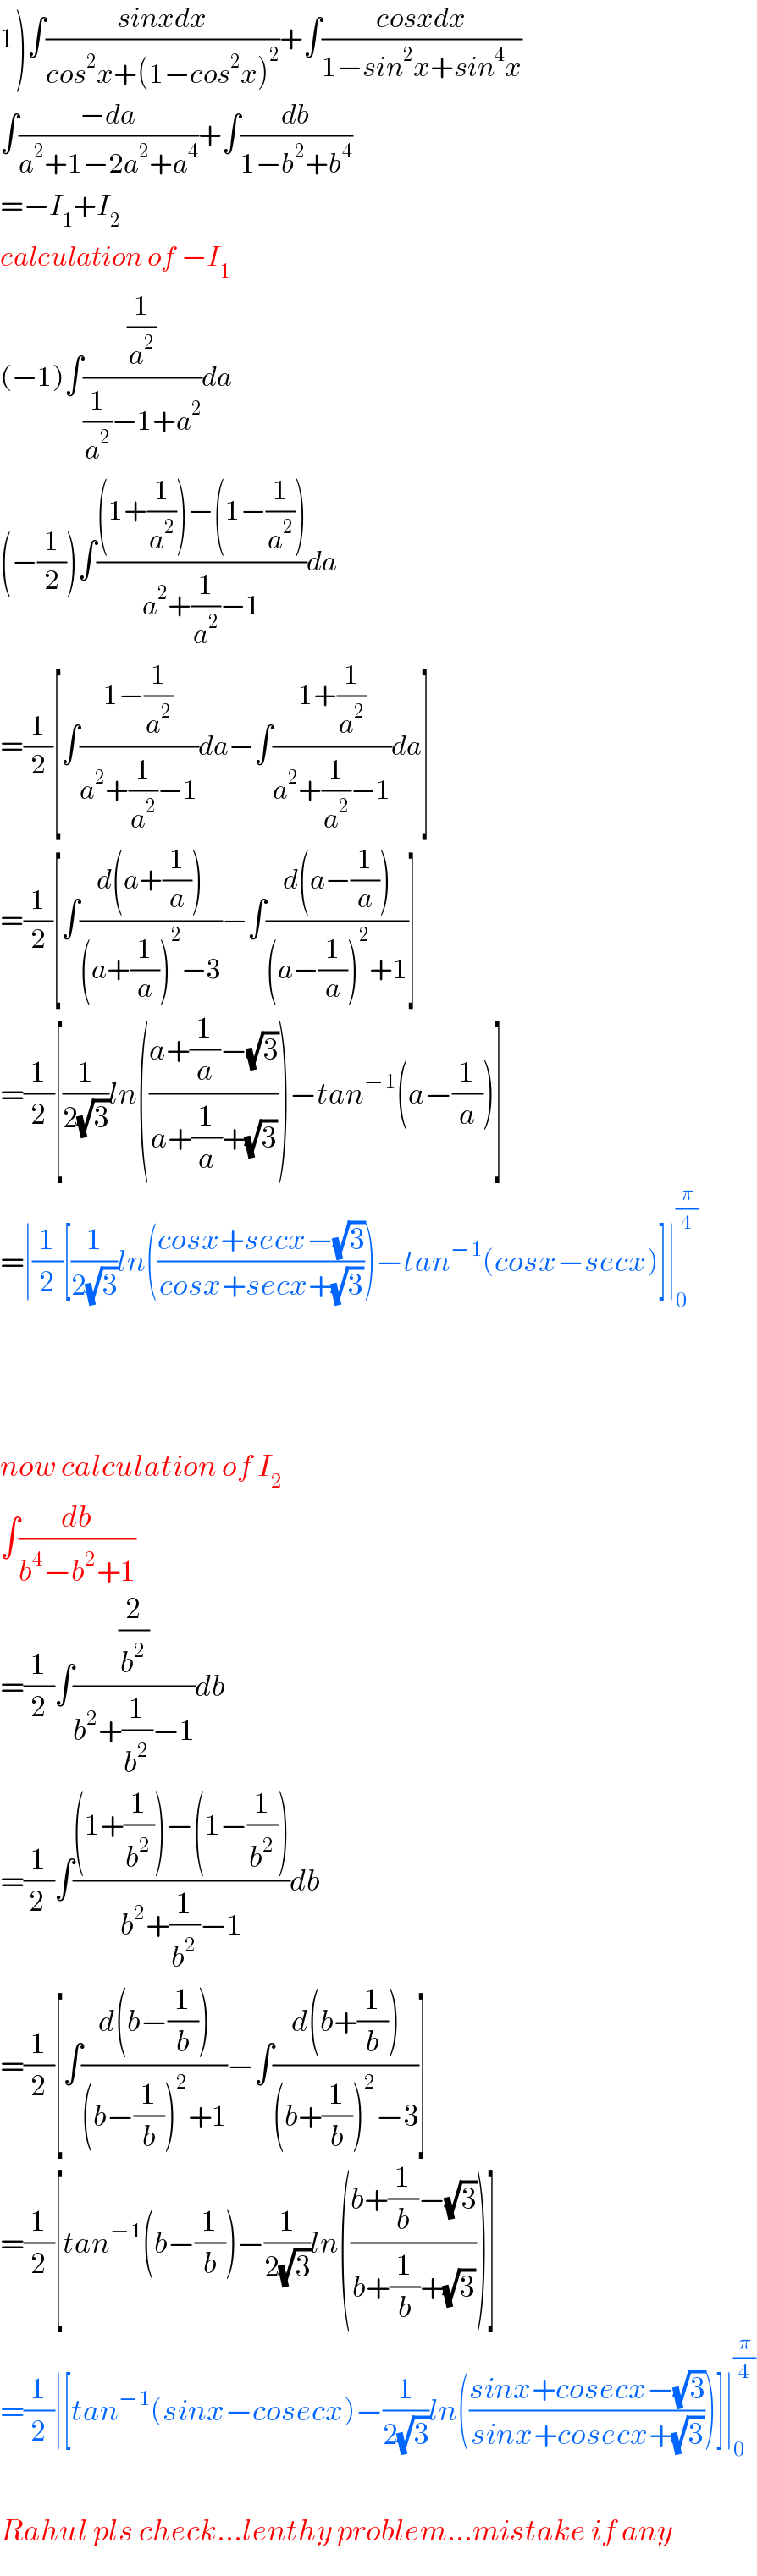 1)∫((sinxdx)/(cos^2 x+(1−cos^2 x)^2 ))+∫((cosxdx)/(1−sin^2 x+sin^4 x))  ∫((−da)/(a^2 +1−2a^2 +a^4 ))+∫(db/(1−b^2 +b^4 ))  =−I_1 +I_2   calculation of −I_1   (−1)∫((1/a^2 )/((1/a^2 )−1+a^2 ))da  (−(1/2))∫(((1+(1/a^2 ))−(1−(1/a^2 )))/(a^2 +(1/a^2 )−1))da  =(1/2)[∫((1−(1/a^2 ))/(a^2 +(1/a^2 )−1))da−∫((1+(1/a^2 ))/(a^2 +(1/a^2 )−1))da]  =(1/2)[∫((d(a+(1/a)))/((a+(1/a))^2 −3))−∫((d(a−(1/a)))/((a−(1/a))^2 +1))]  =(1/2)[(1/(2(√3)))ln(((a+(1/a)−(√3))/(a+(1/a)+(√3))))−tan^(−1) (a−(1/a))]  =∣(1/2)[(1/(2(√3)))ln(((cosx+secx−(√3))/(cosx+secx+(√3))))−tan^(−1) (cosx−secx)]∣_0 ^(π/4)         now calculation of I_2   ∫(db/(b^4 −b^2 +1))  =(1/2)∫((2/b^2 )/(b^2 +(1/b^2 )−1))db  =(1/(2 ))∫(((1+(1/b^2 ))−(1−(1/b^2 )))/(b^2 +(1/b^2 )−1))db  =(1/2)[∫((d(b−(1/b)))/((b−(1/b))^2 +1))−∫((d(b+(1/b)))/((b+(1/b))^2 −3))]  =(1/2)[tan^(−1) (b−(1/b))−(1/(2(√3)))ln(((b+(1/b)−(√3))/(b+(1/b)+(√3))))]  =(1/2)∣[tan^(−1) (sinx−cosecx)−(1/(2(√3)))ln(((sinx+cosecx−(√3))/(sinx+cosecx+(√3))))]∣_0 ^(π/4)     Rahul pls check...lenthy problem...mistake if any  